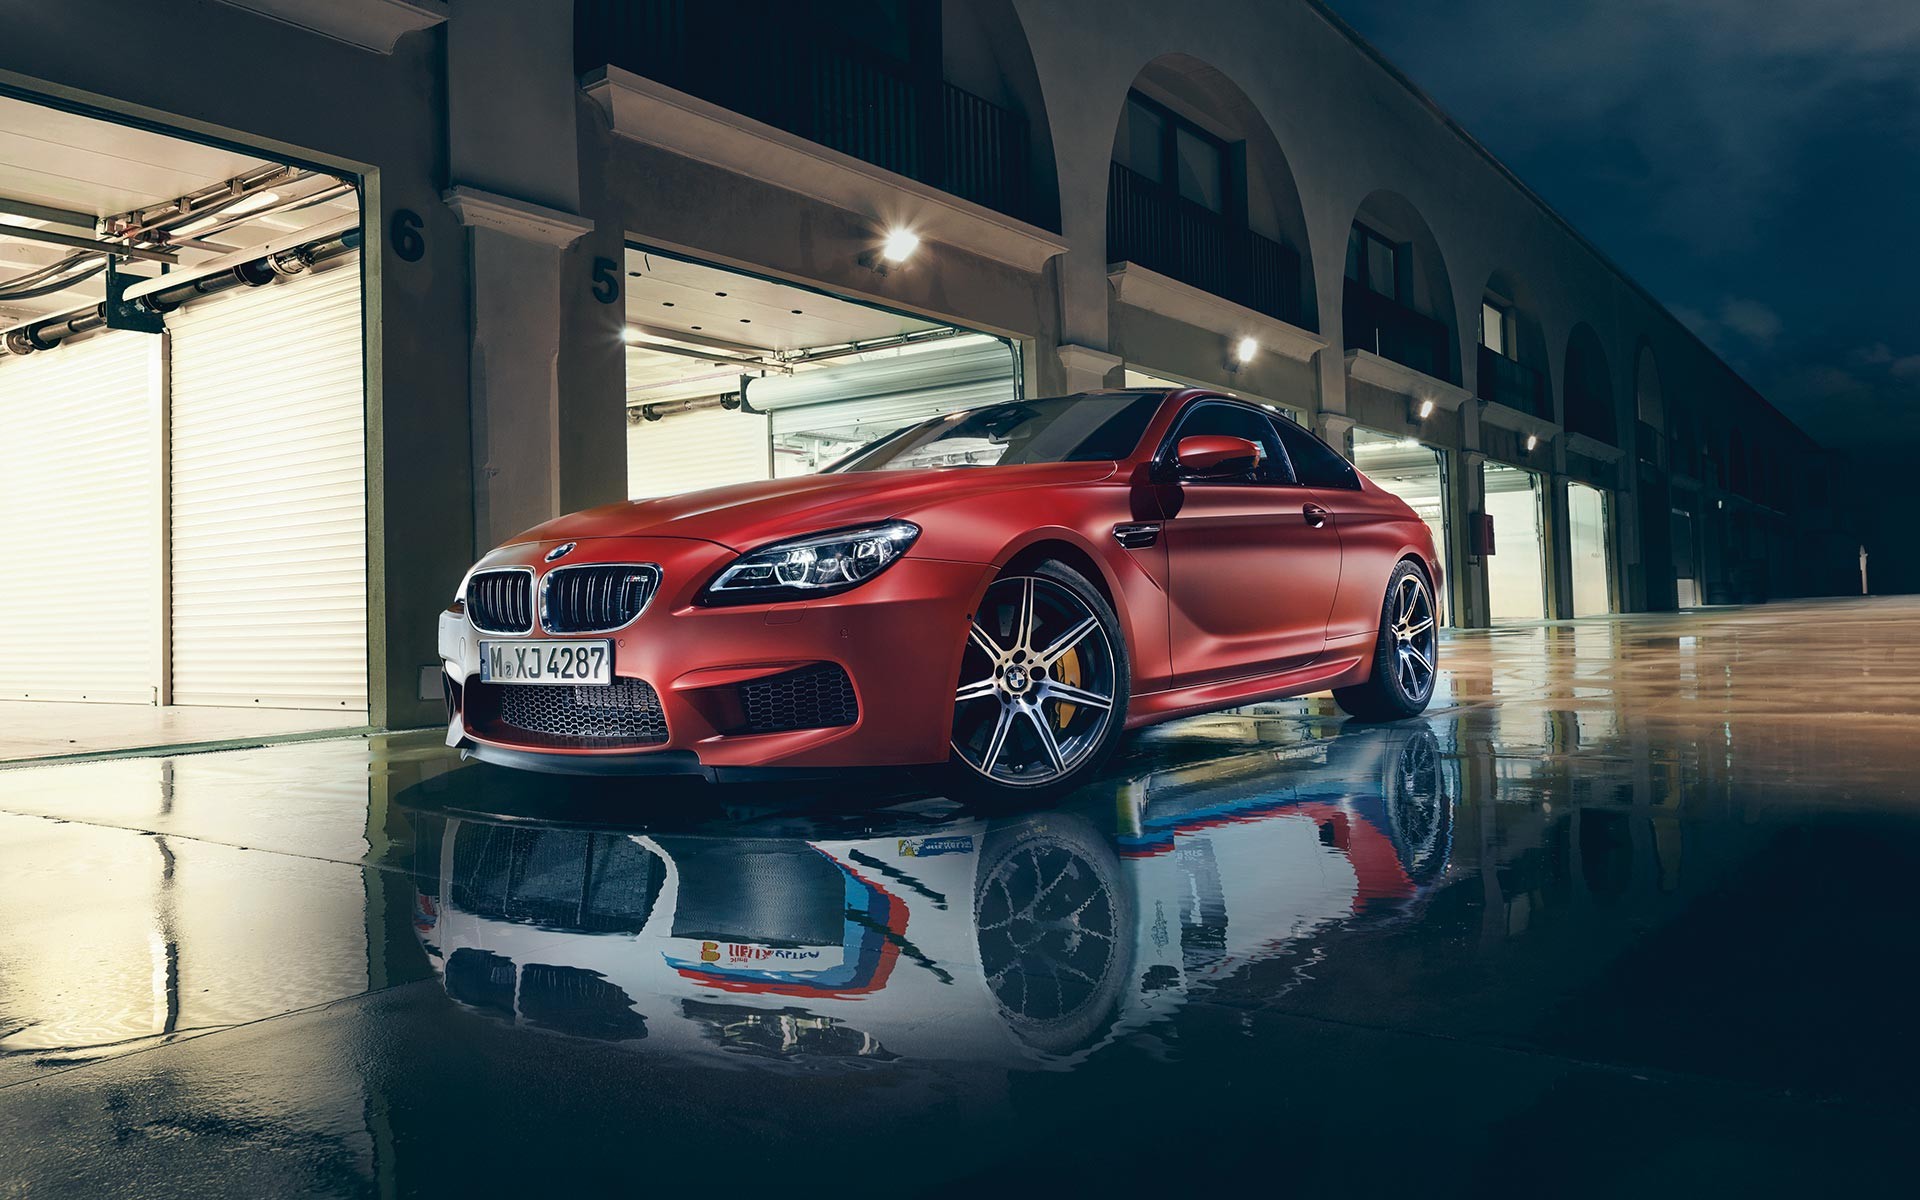 Car BMW Sports Car Urban Building Dtm Reflection Night Lights Garages Red Cars Coupe BMW M6 BMW 6 Se 1920x1200